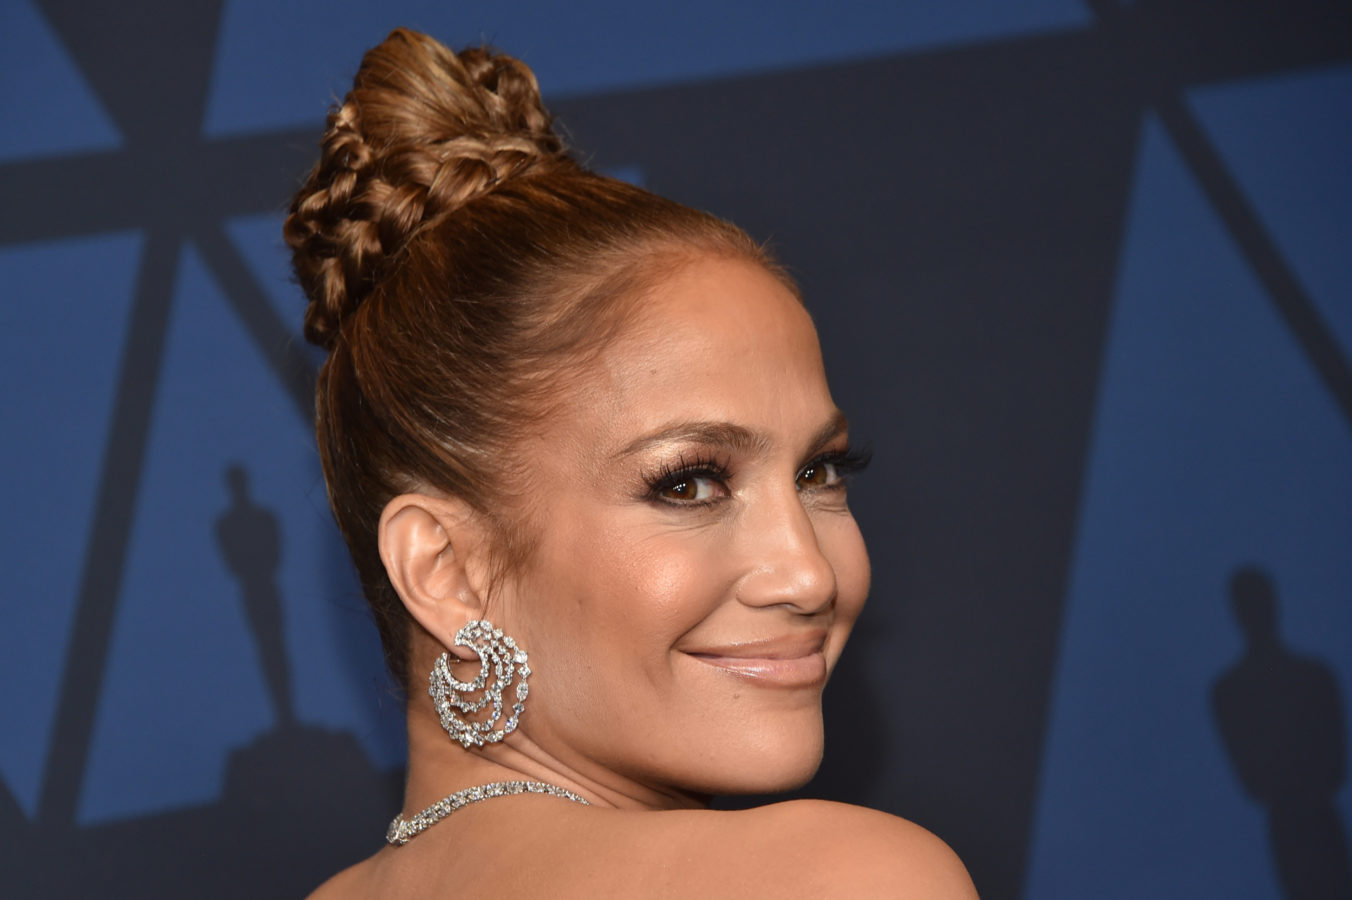 Our top girl! The best pictures of Jennifer Lopez wearing the tiniest bikinis